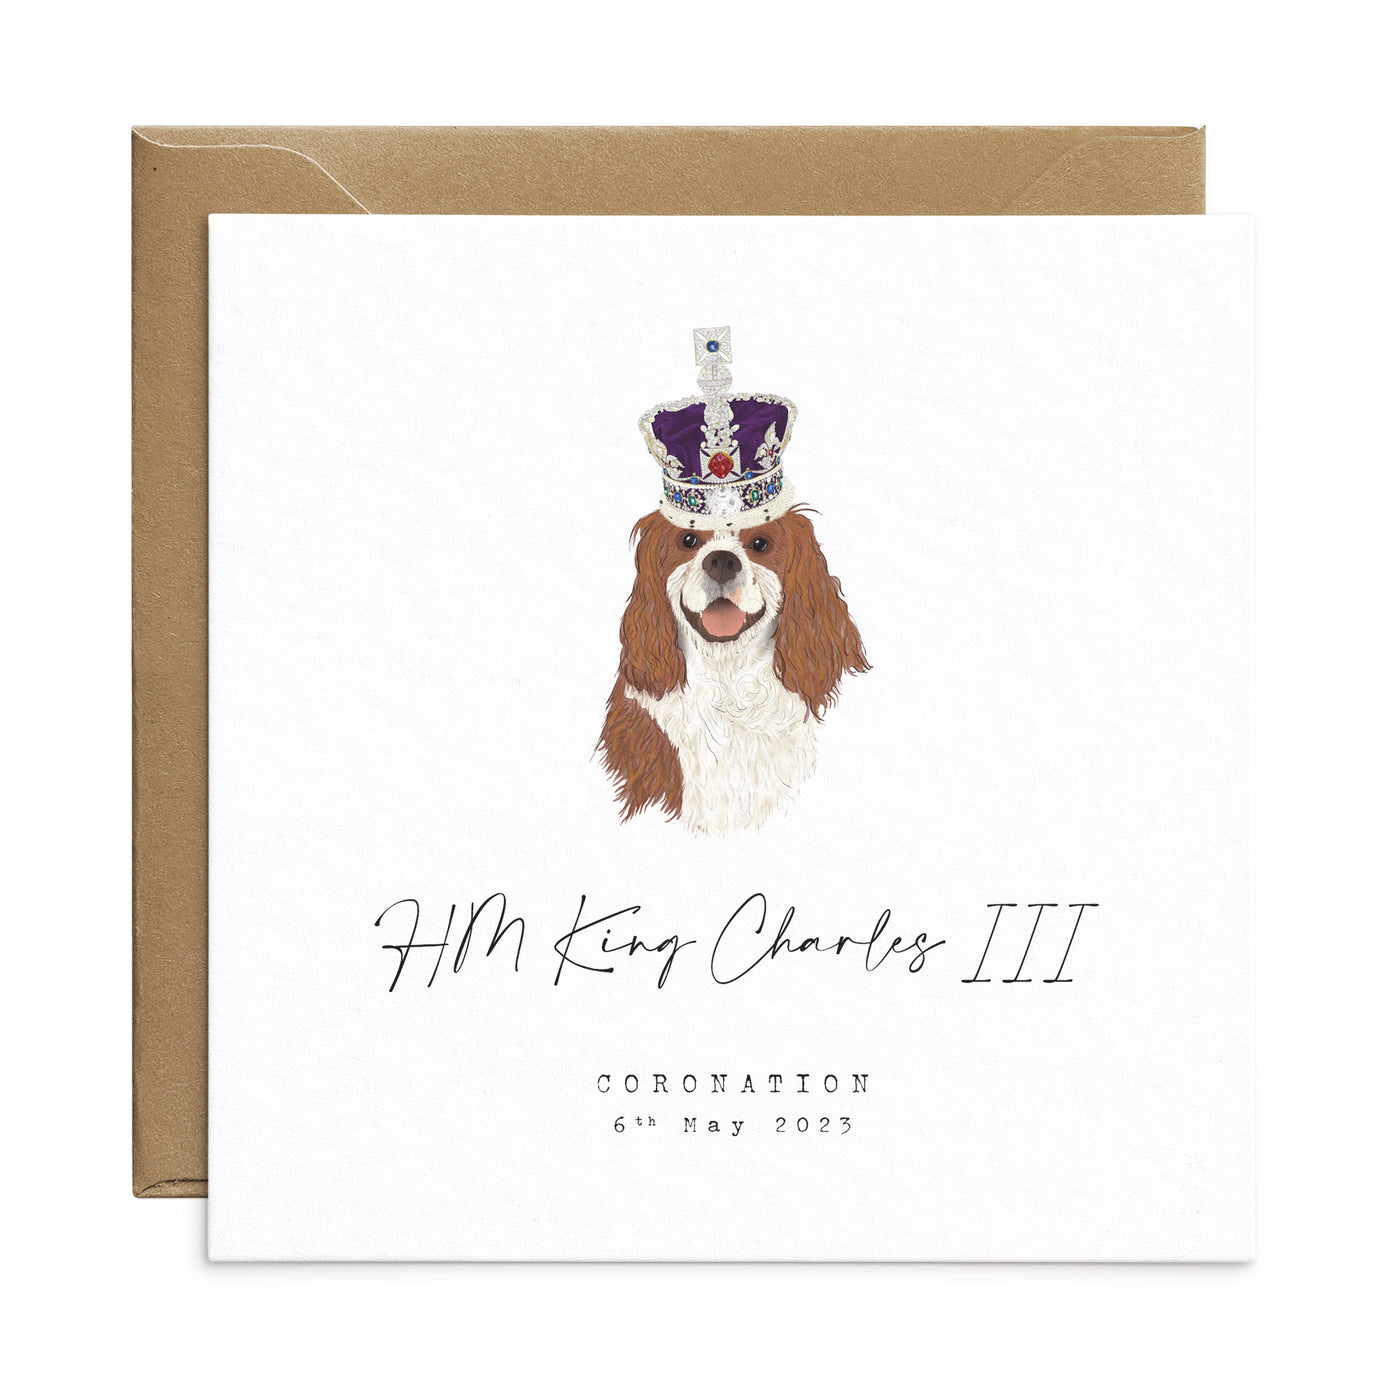 Cute-Illustration-King-Charles-Spaniel-Wearing-Crown-Jewels-King-Charles-Coronation-Greetings-Card-Poppins-and-co